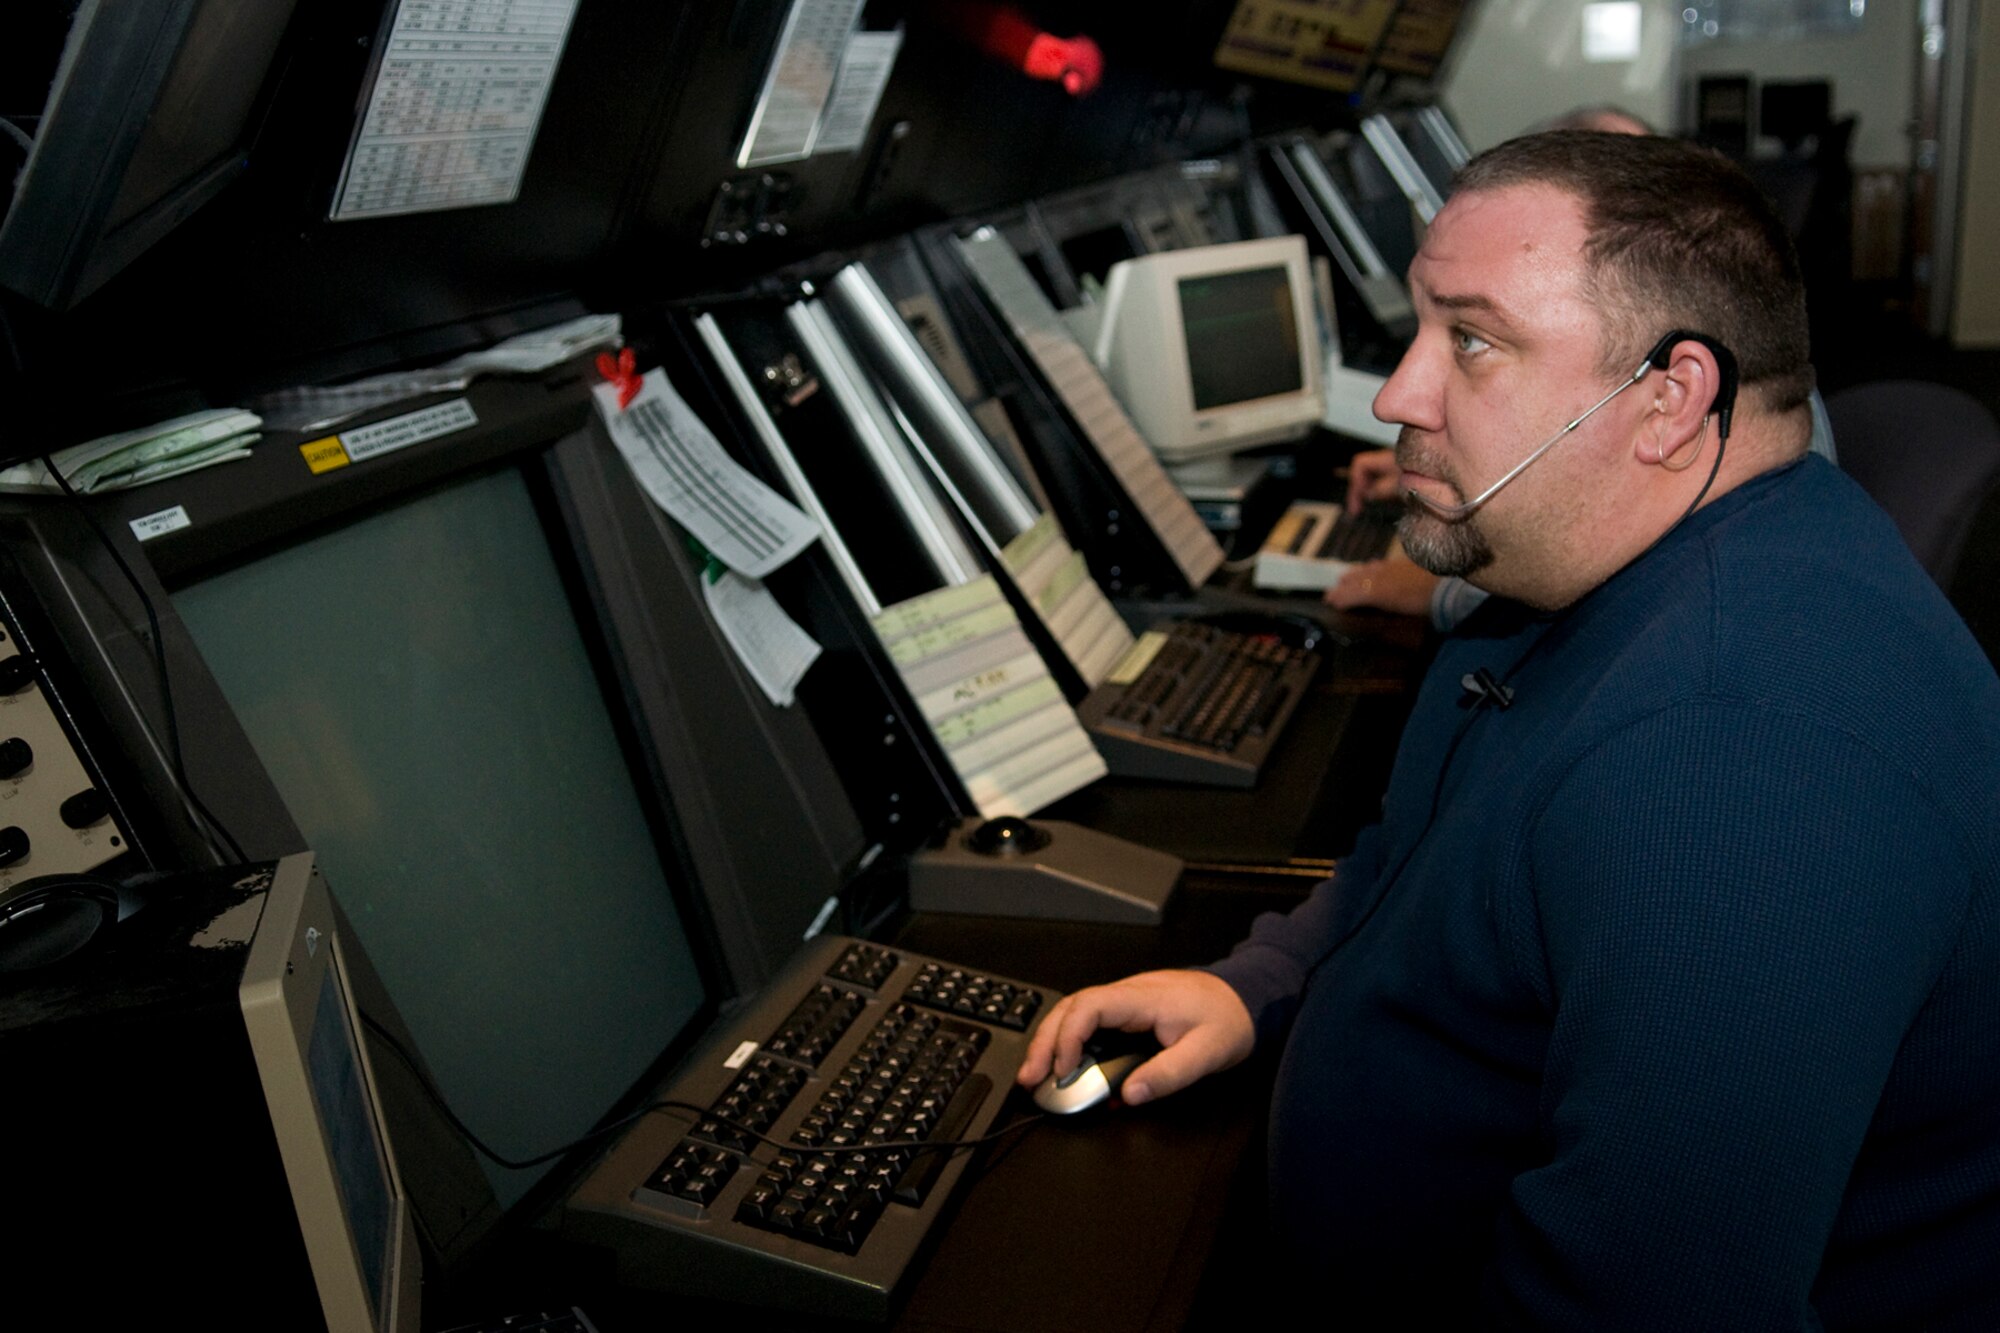 GRISSOM AIR RESERVE BASE, Ind. -- John Rhoutsong, an approach controller with the 434th Operations Support Squadron here, controls air traffic between Chicago and Indianapolis Jan. 20. Grissom air traffic controllers have been training hard to prepare for a blitz of Super Bowl air traffic since October 2011. (U.S. Air Force photo/Tech. Sgt. Mark R. W. Orders-Woempner) 
